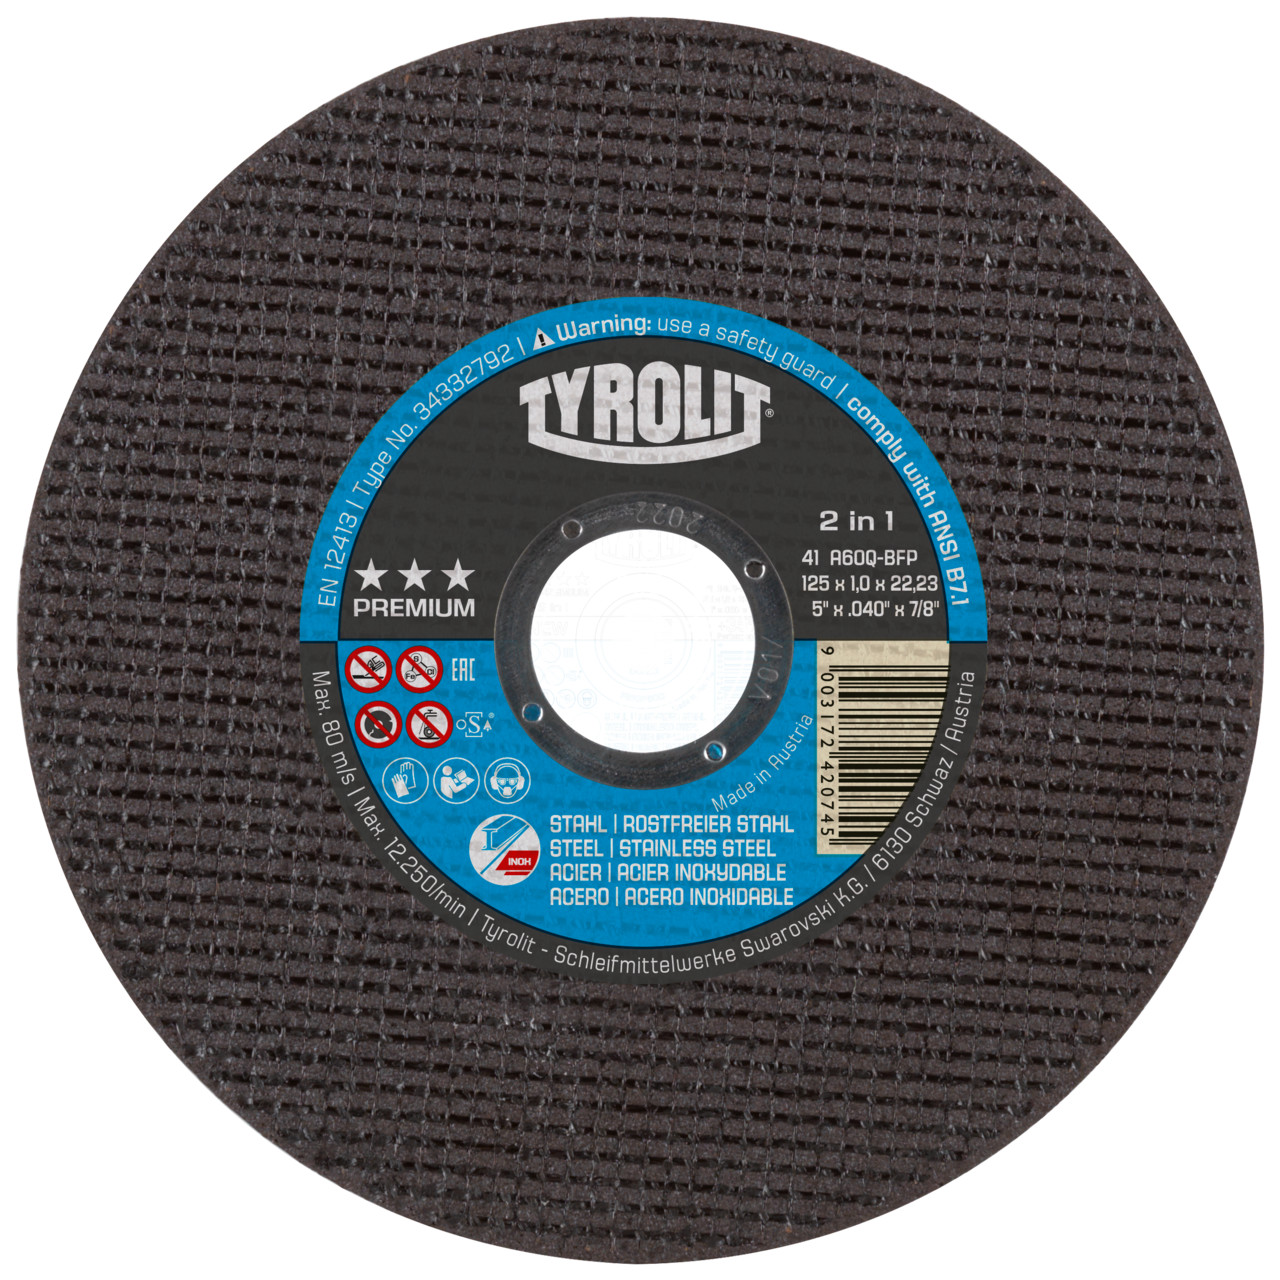 TYROLIT cut-off wheels DxDxH 150x2.5x22.23 2in1 for steel and stainless steel, shape: 41 - straight version, Art. 872340